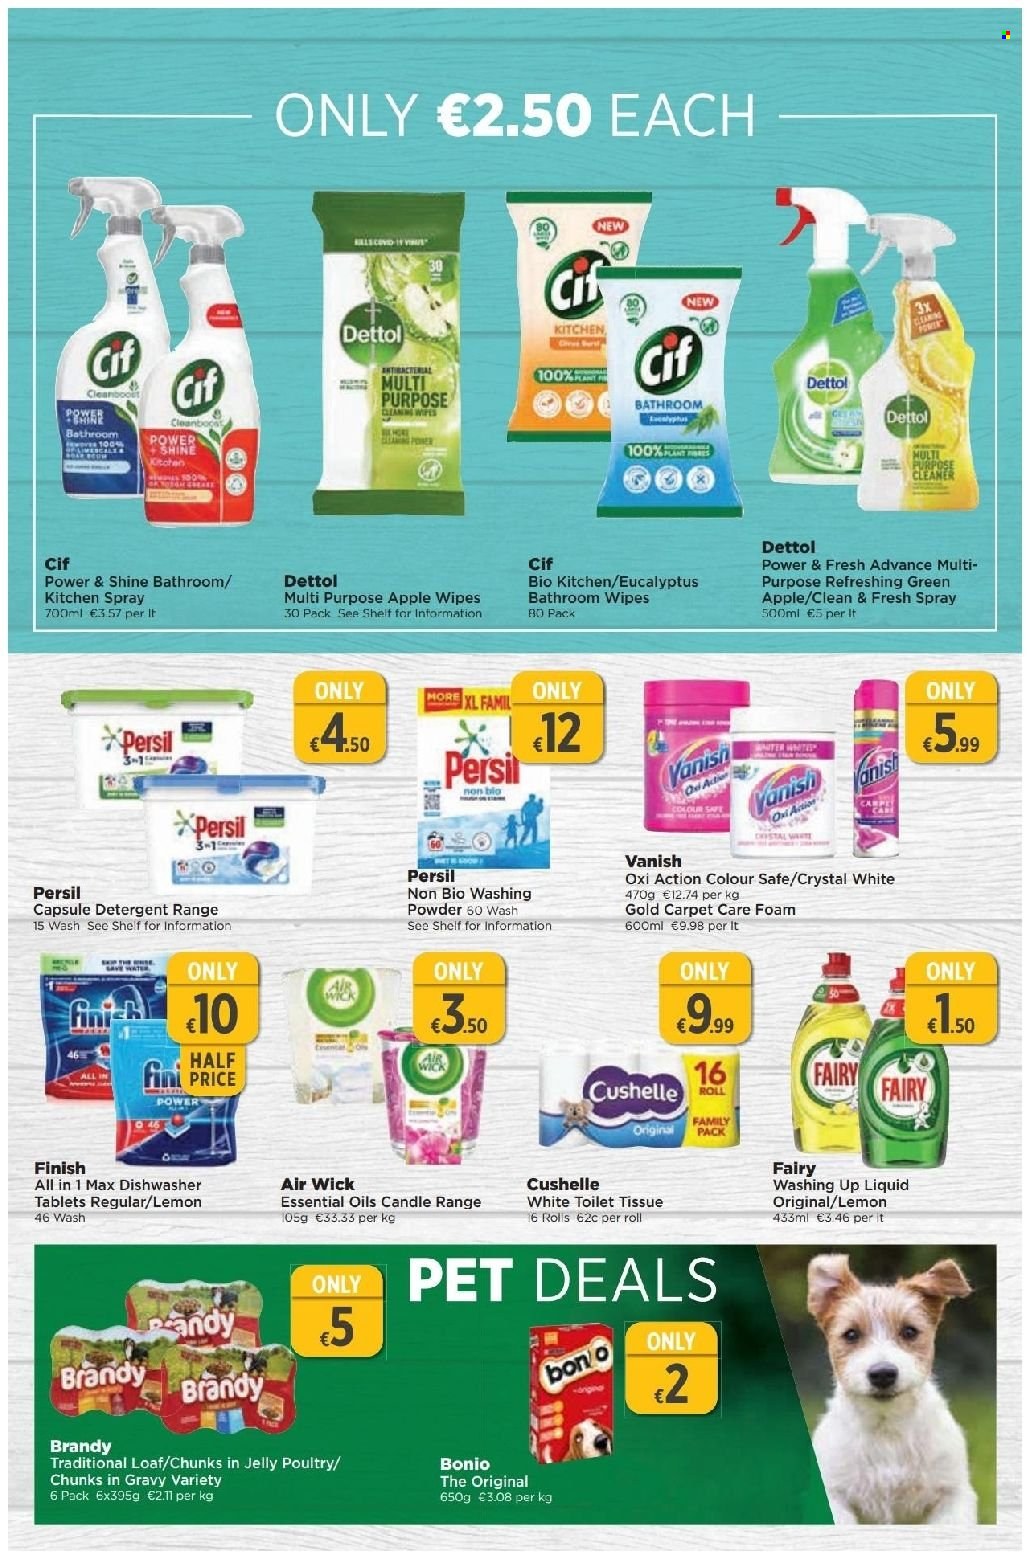 thumbnail - EUROSPAR offer  - 26.05.2022 - 15.06.2022 - Sales products - brandy, cleansing wipes, wipes, Dettol, toilet paper, Cushelle, detergent, cleaner, Fairy, Cif, Vanish, Persil, laundry powder, dishwashing liquid, dishwasher cleaner, dishwasher tablets, candle, Air Wick, essential oils. Page 15.